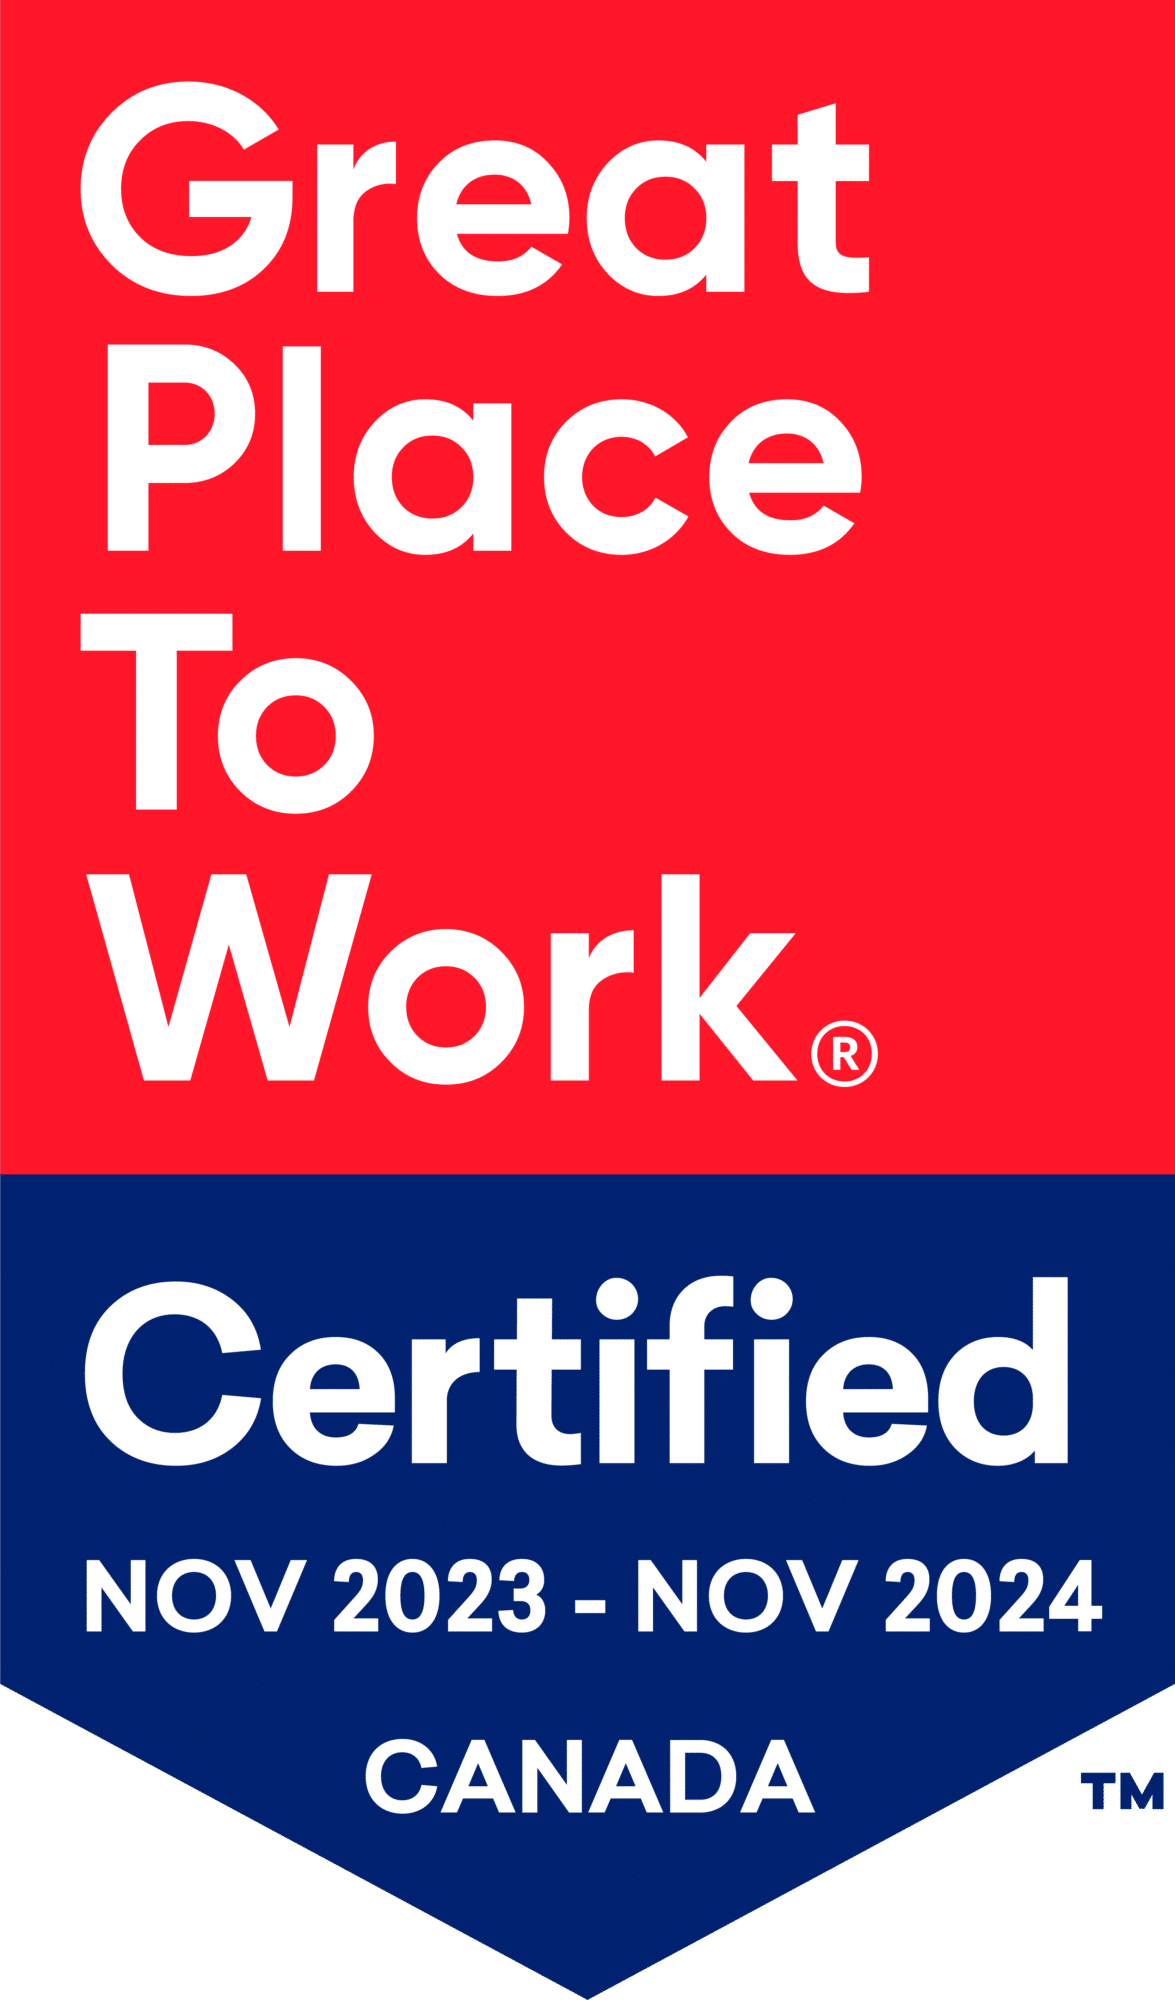 Great Place to Work Certified
November 2023 - November 2024, Canada: opens the Great Place to Work website home page